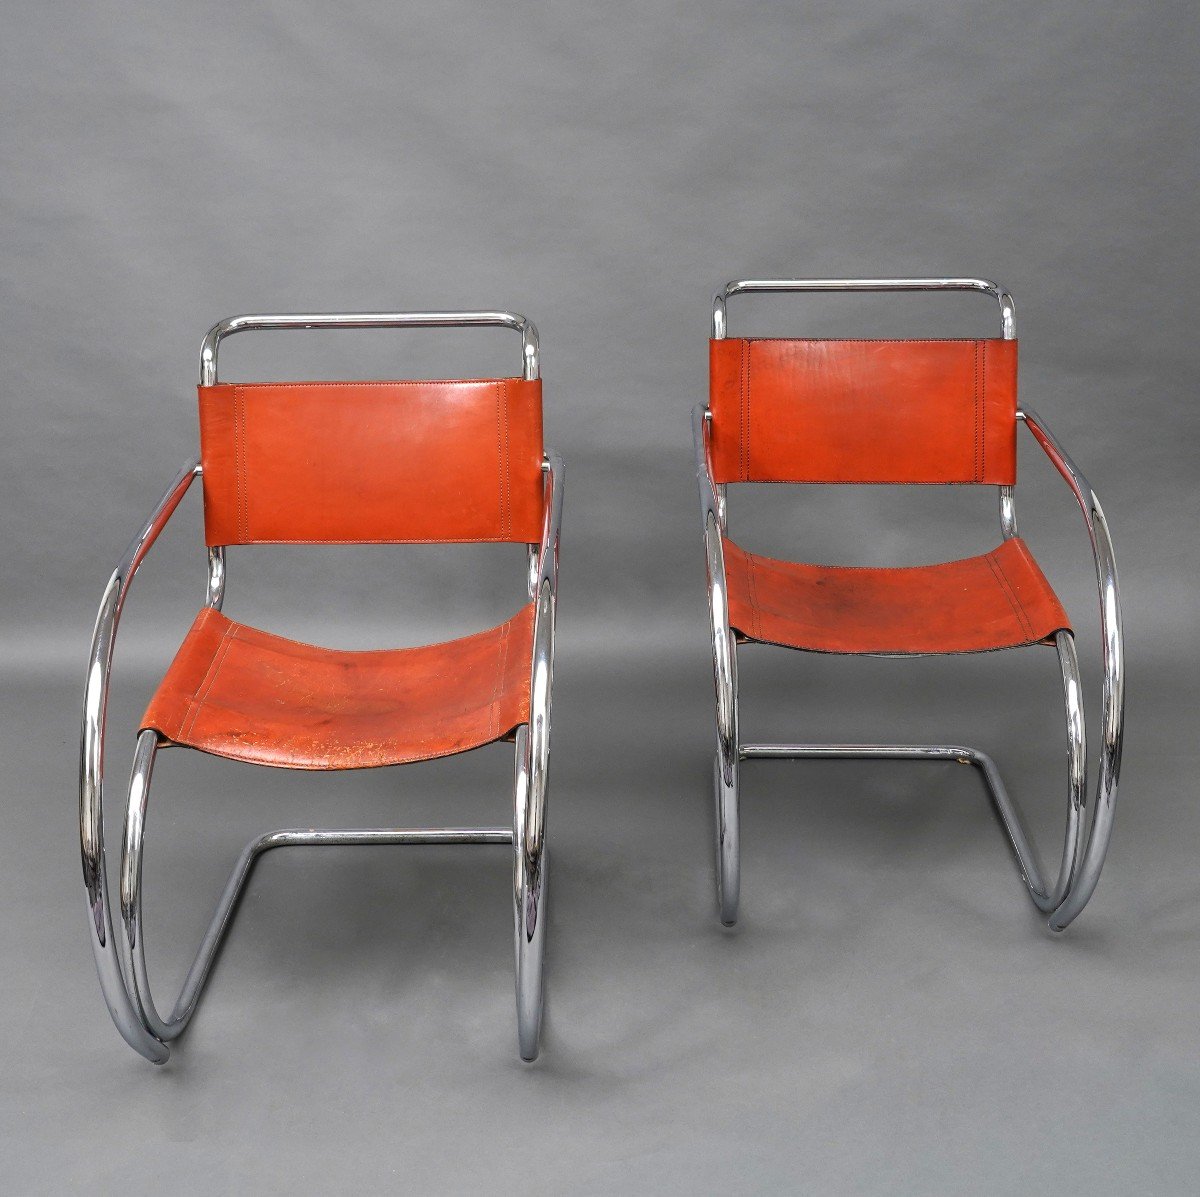 Pair Of Mr20 Armchairs, Based On The Model By Mies Van Der Rohe, Germany, Circa 1970